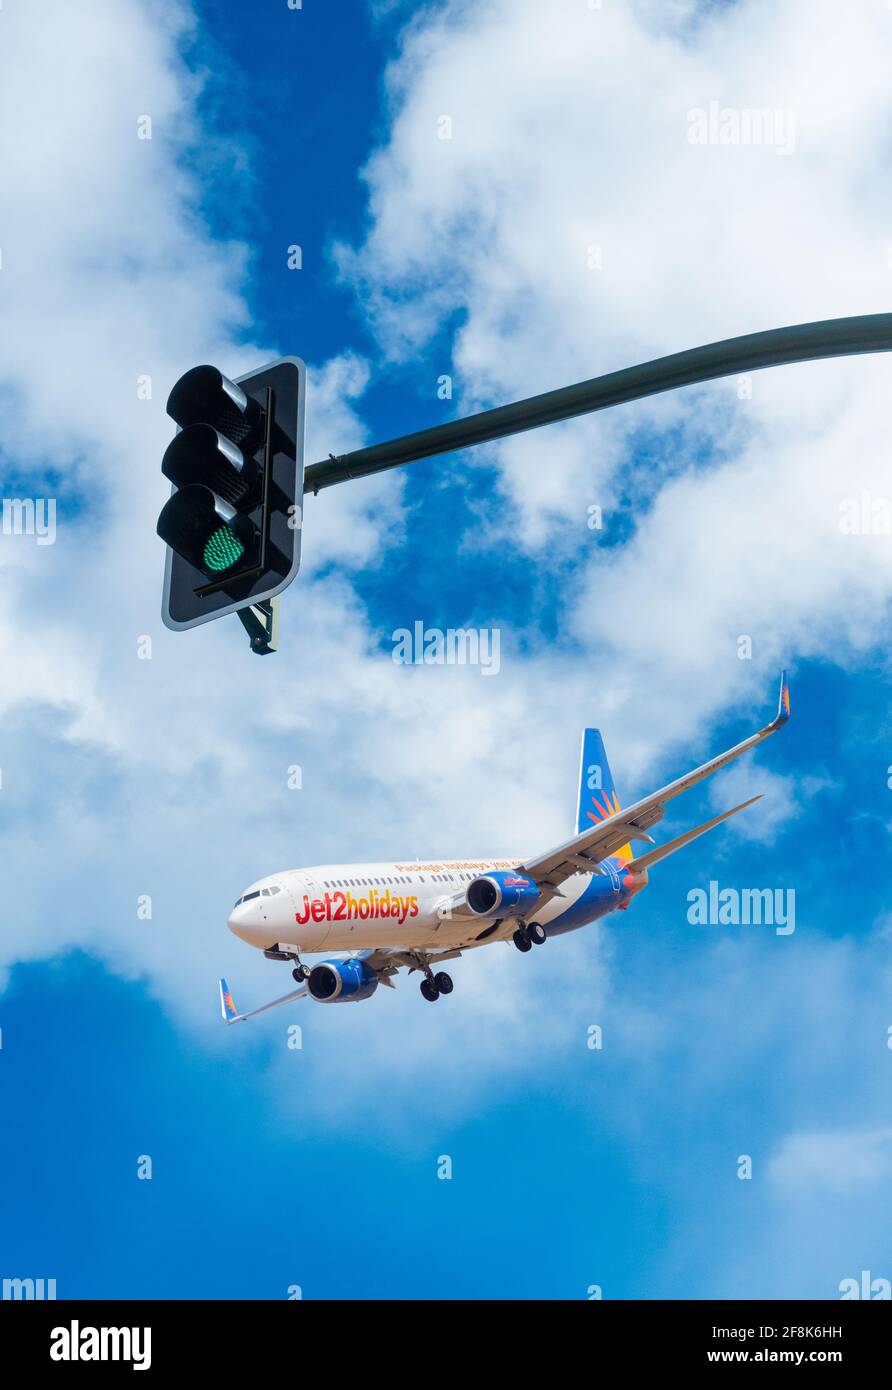 Jet 2, Jet2.com aircraft, airplane and green traffic lights. Tourism, aviation, Covid, travel... concept Stock Photo